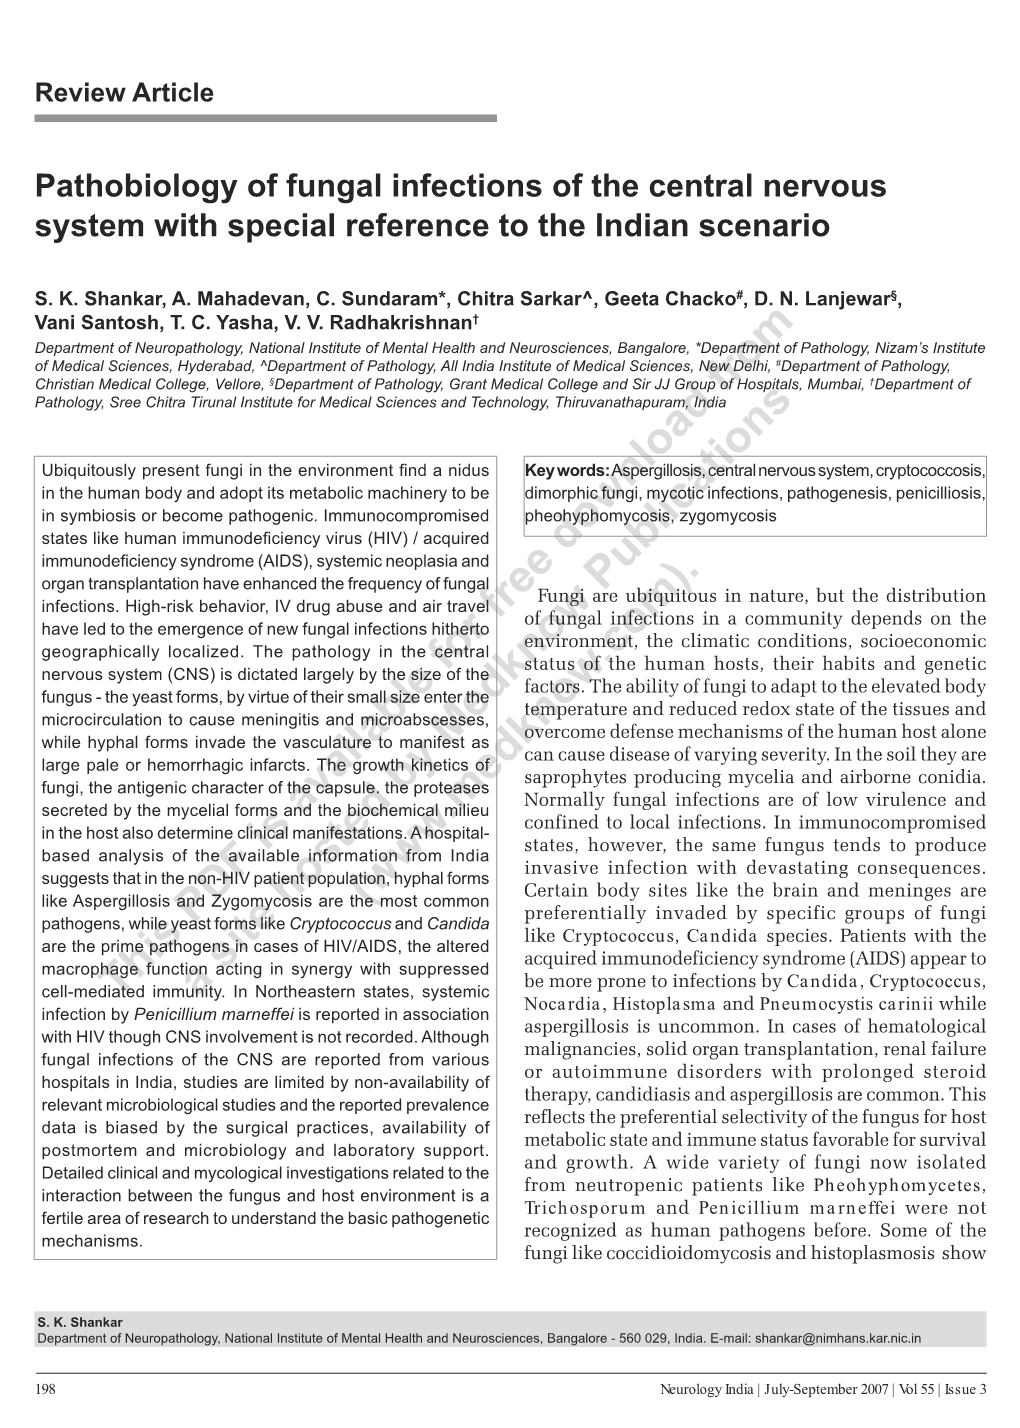 Pathobiology of Fungal Infections of the Central Nervous System with Special Reference to the Indian Scenario